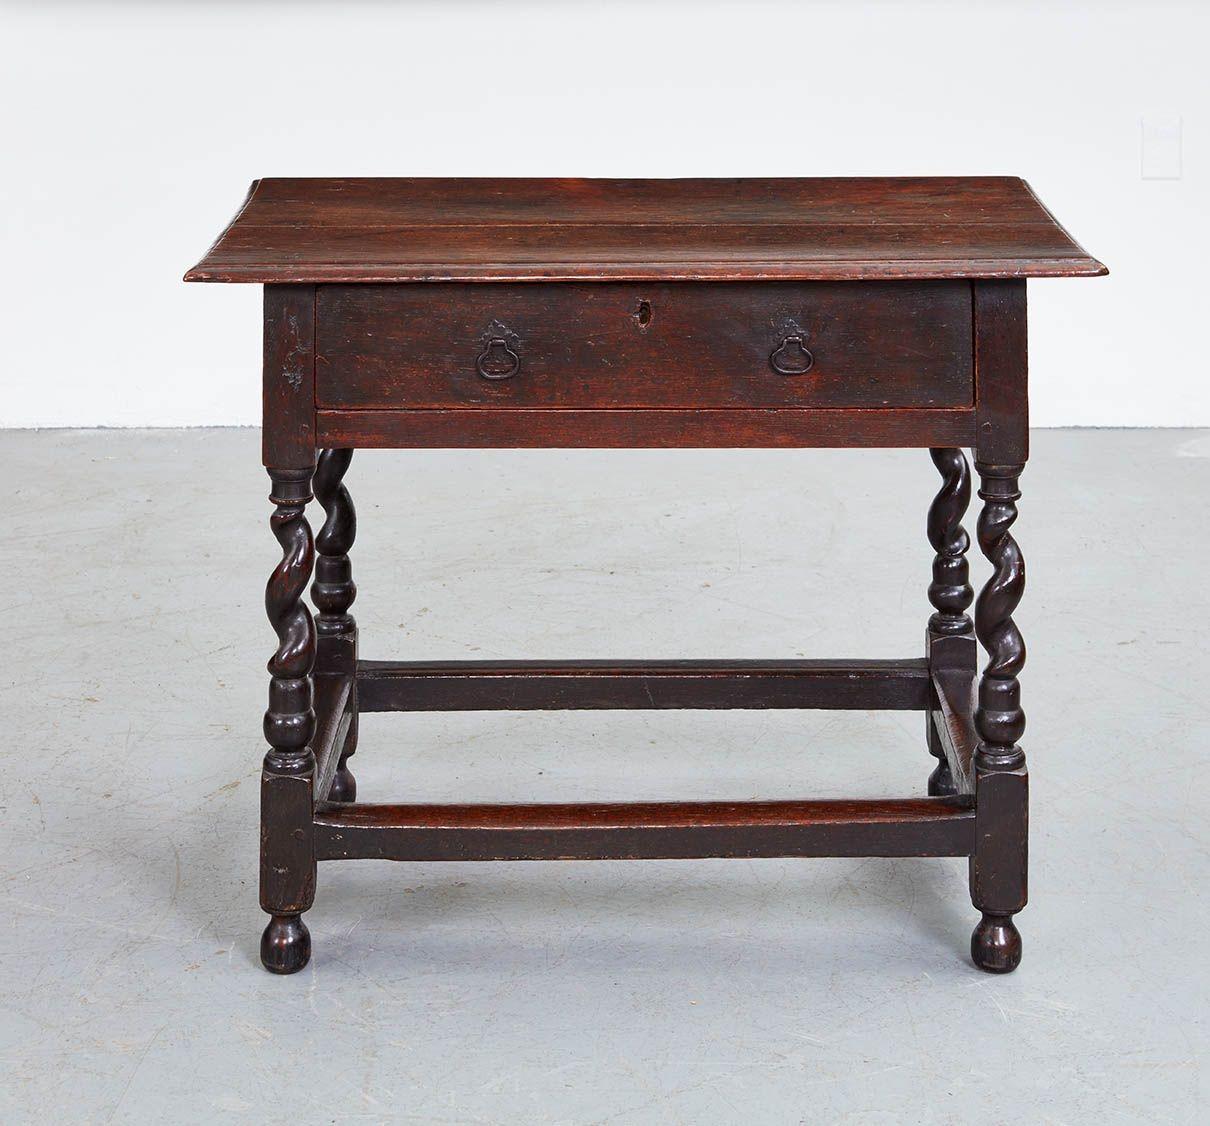 An early English oak table having two plank top with molded edge with overhang to all sides, over single drawer with center bronze pull, on corkscrew legs joined by rectangular section box stretcher. Wonderful proportions and very good color.